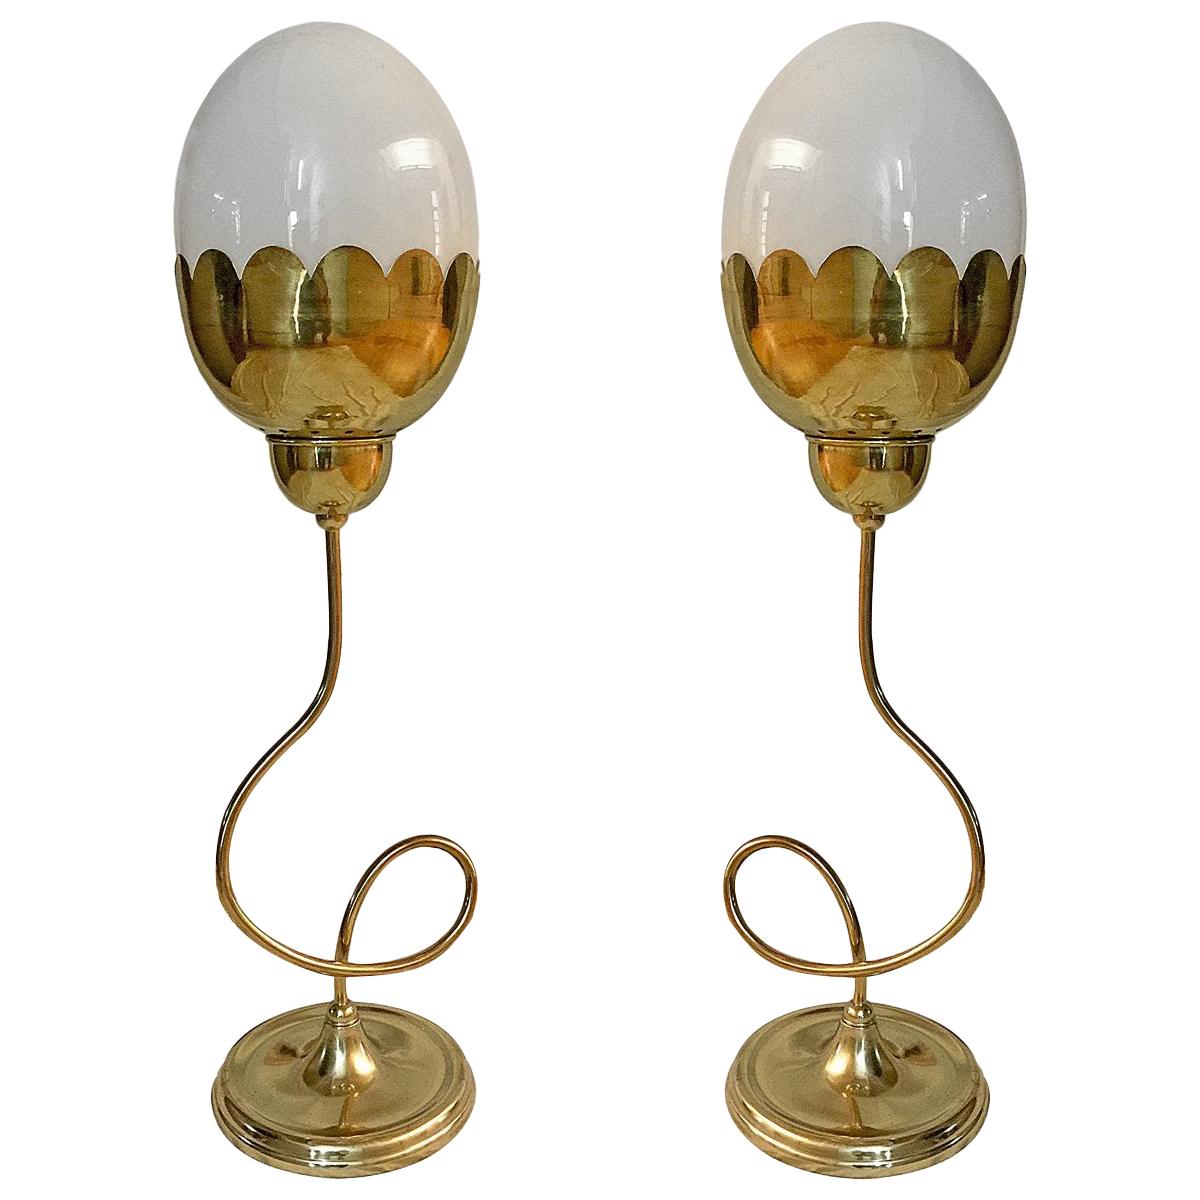 Set of Large Tulip Table Lamps with Glass Globes, Sold Per Pair